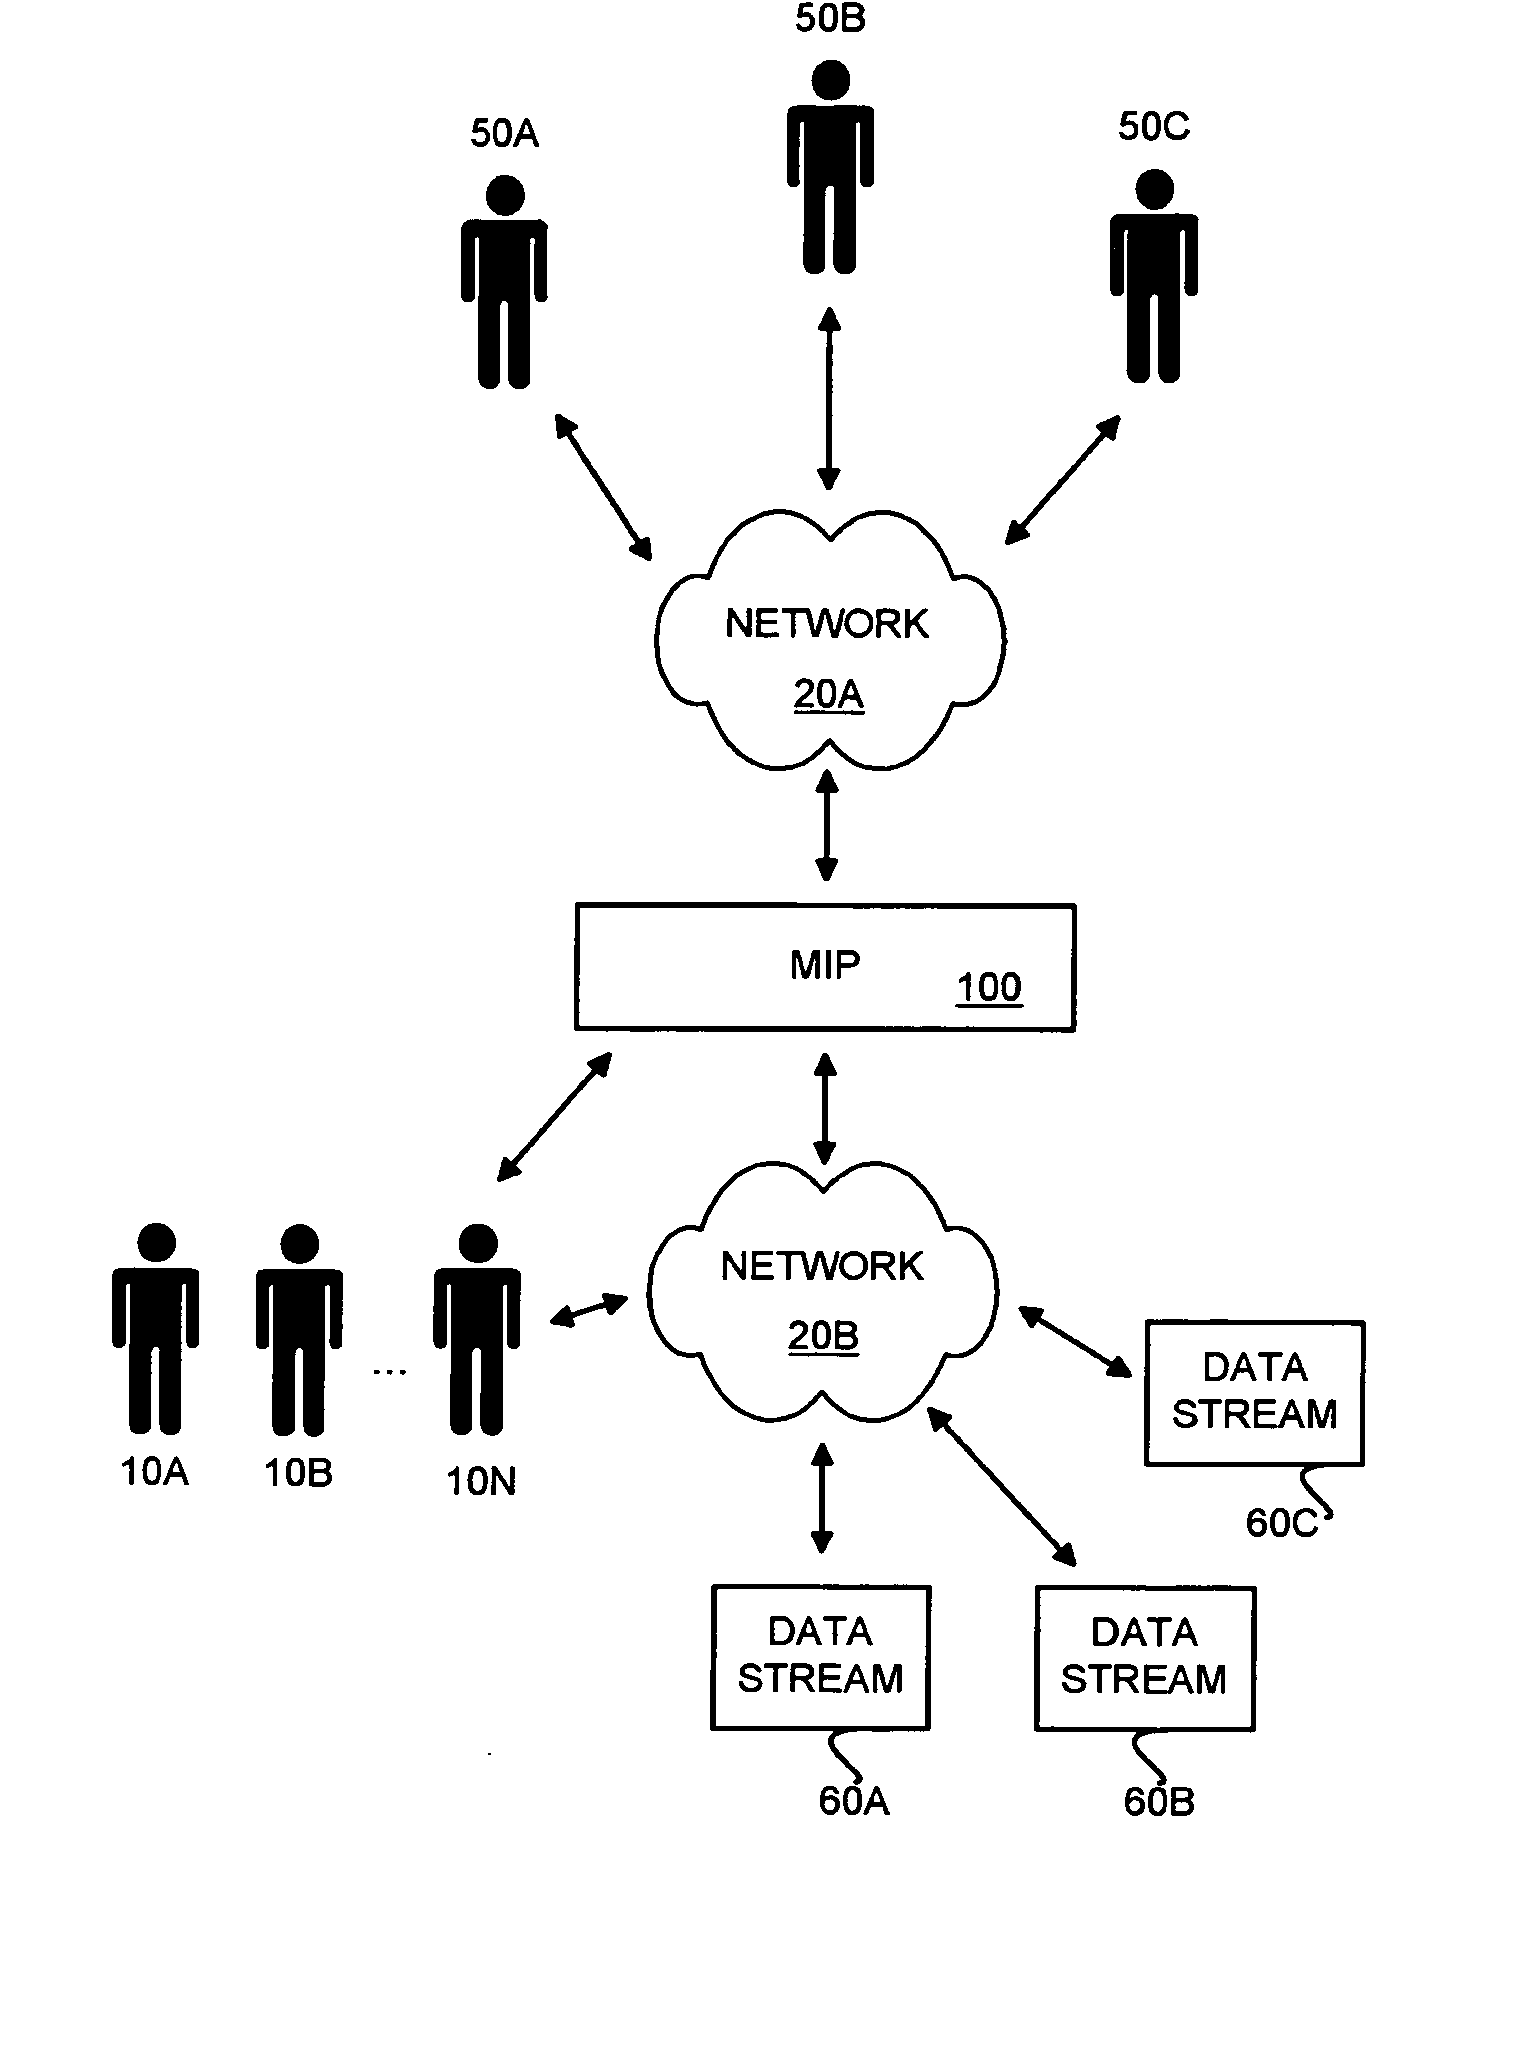 Systems and methods for creating and maintaining a market intelligence portal